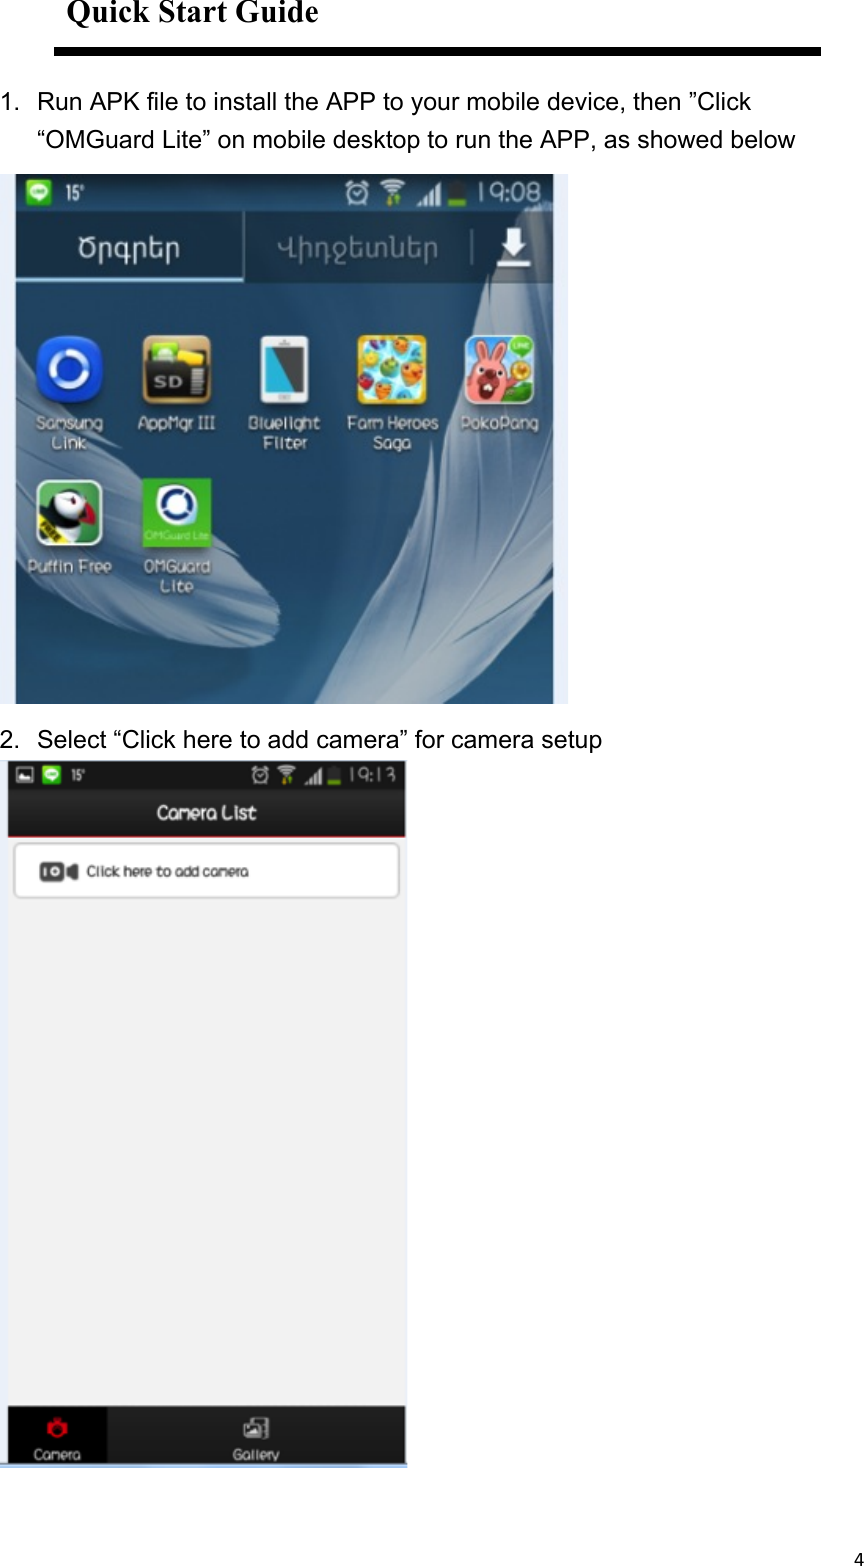 4&quot;&quot;Quick Start Guide   1.  Run APK file to install the APP to your mobile device, then ”Click “OMGuard Lite” on mobile desktop to run the APP, as showed below   &quot;2.  Select “Click here to add camera” for camera setup    